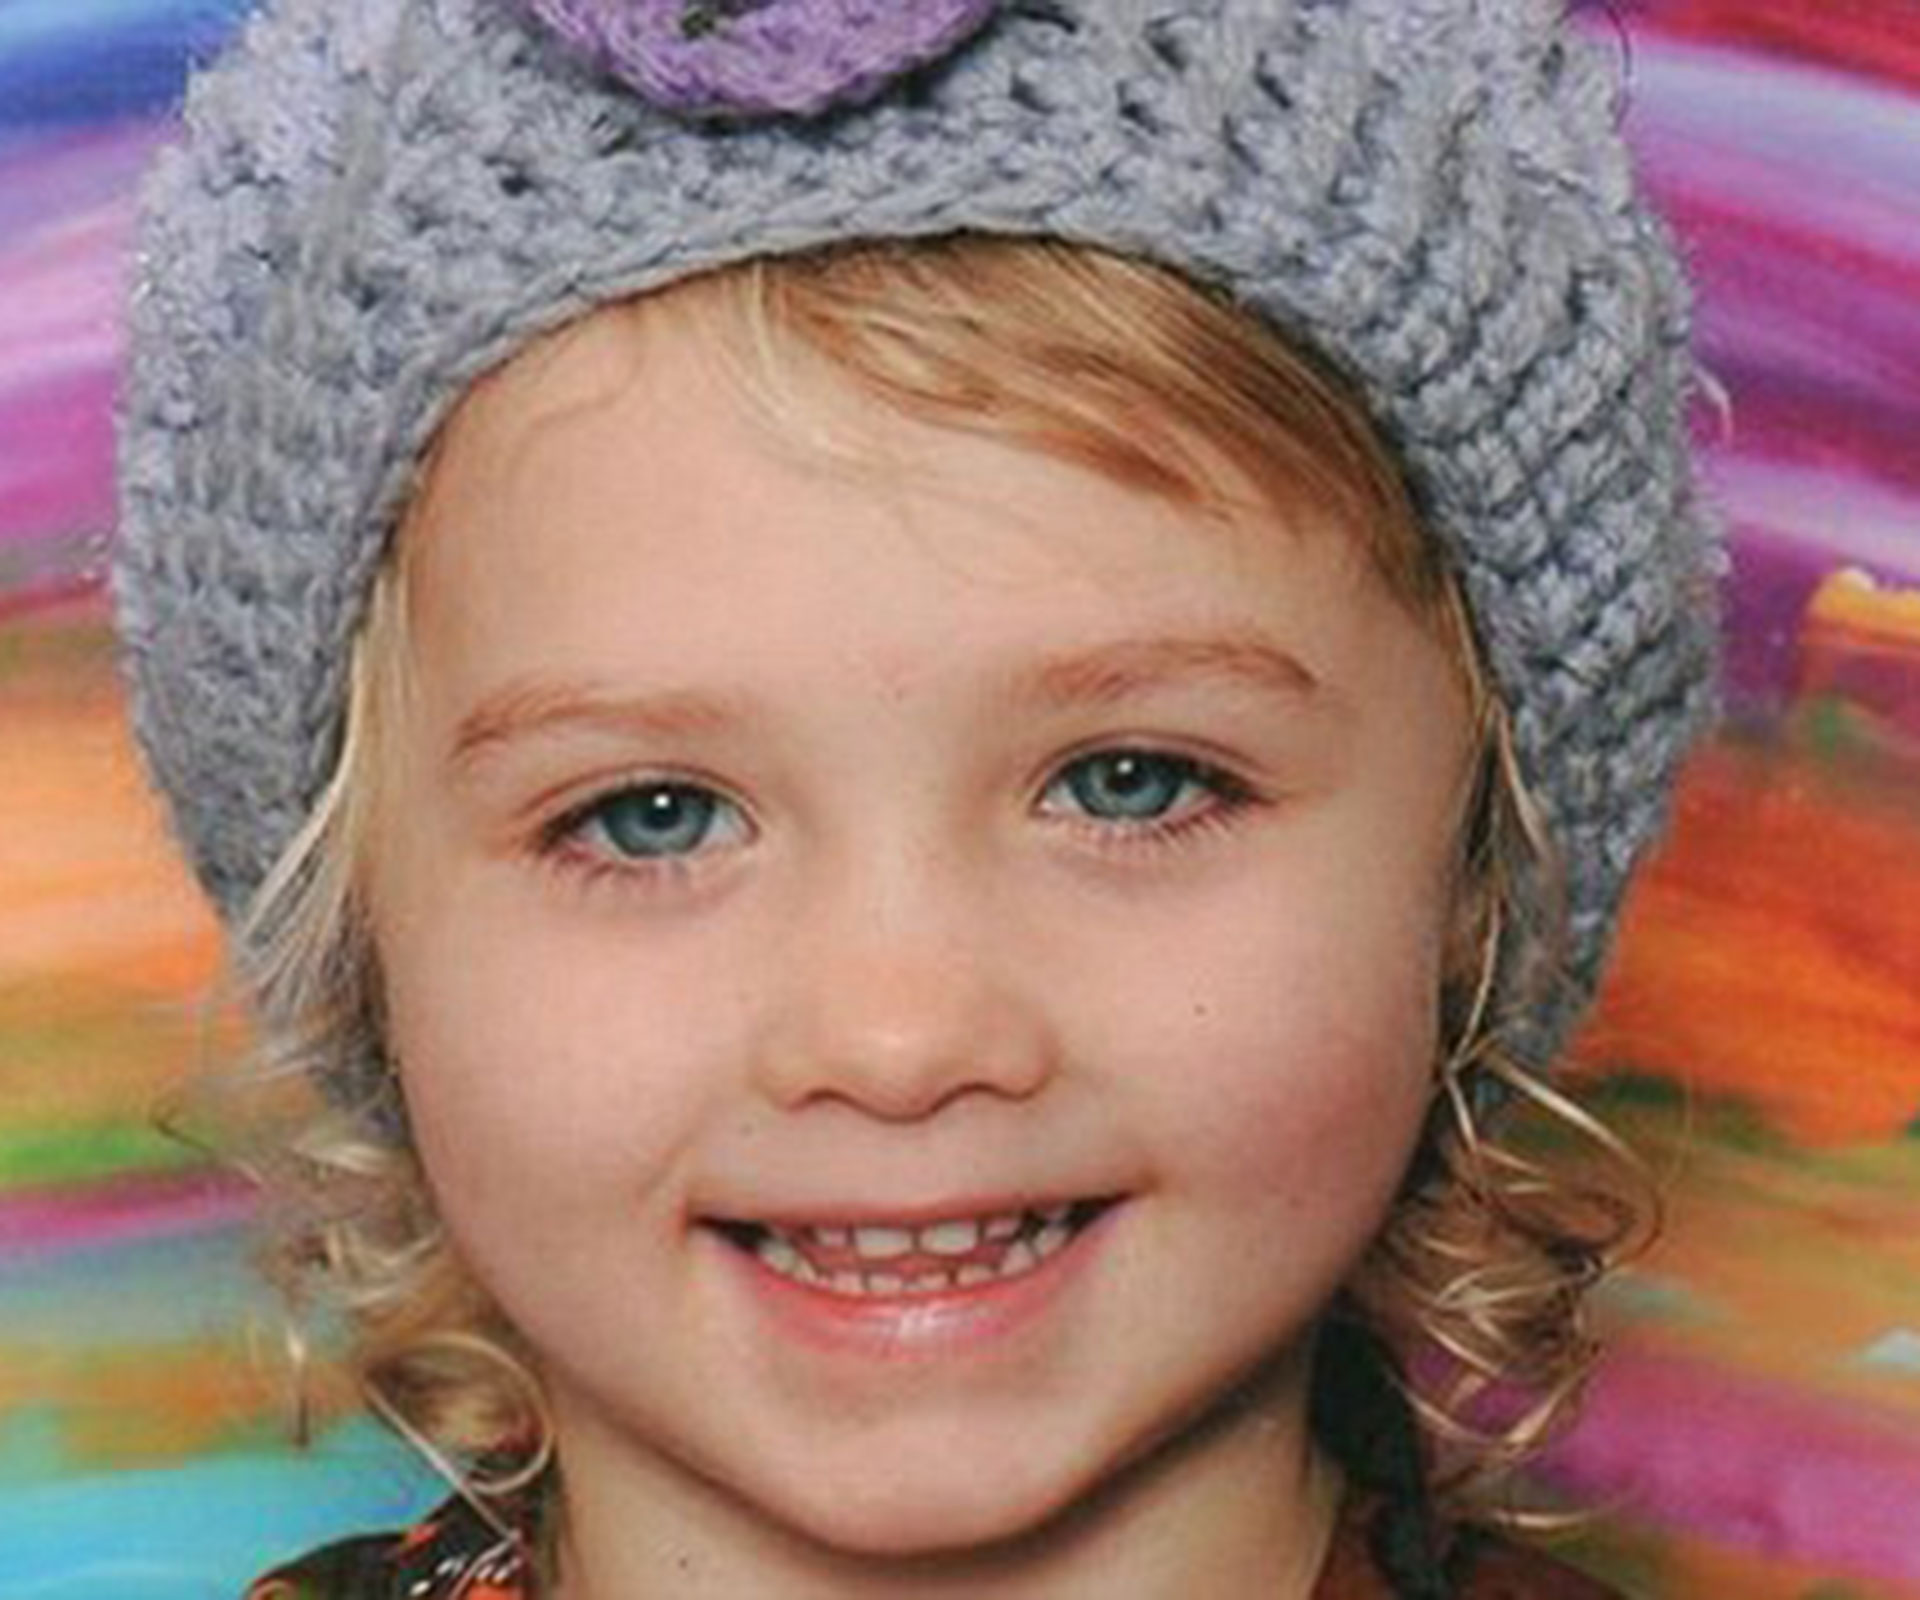 Girl, 4, dies after being sent home from hospital three times